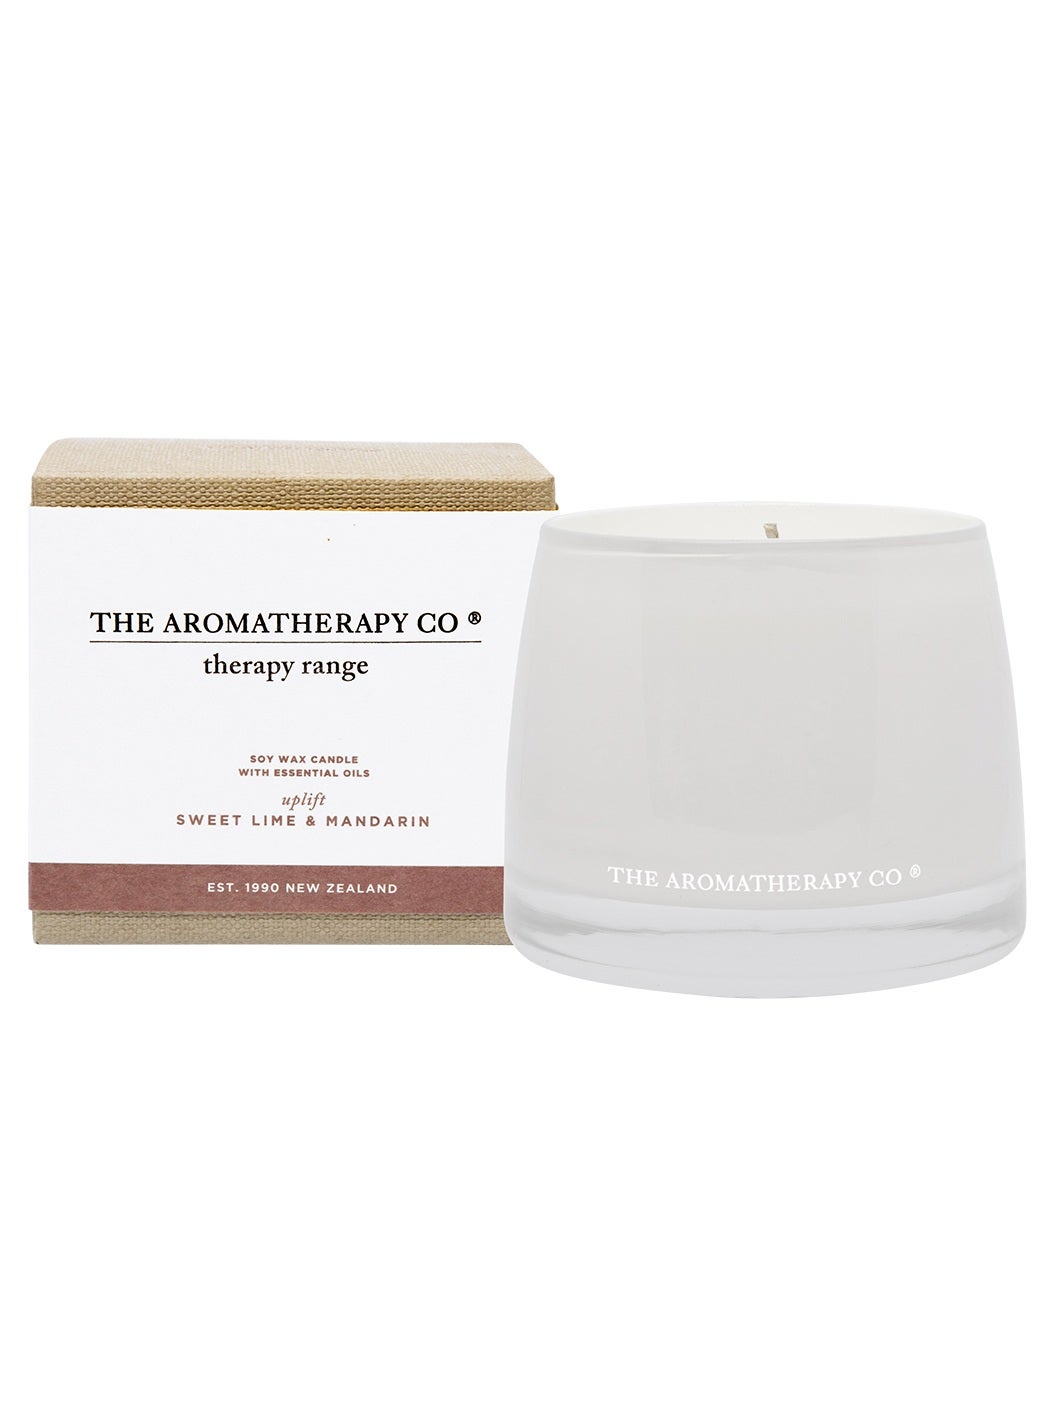 THE AROMATHERAPY CO | CANDLE UPLIFT | SWEET LIME & MANDARIN